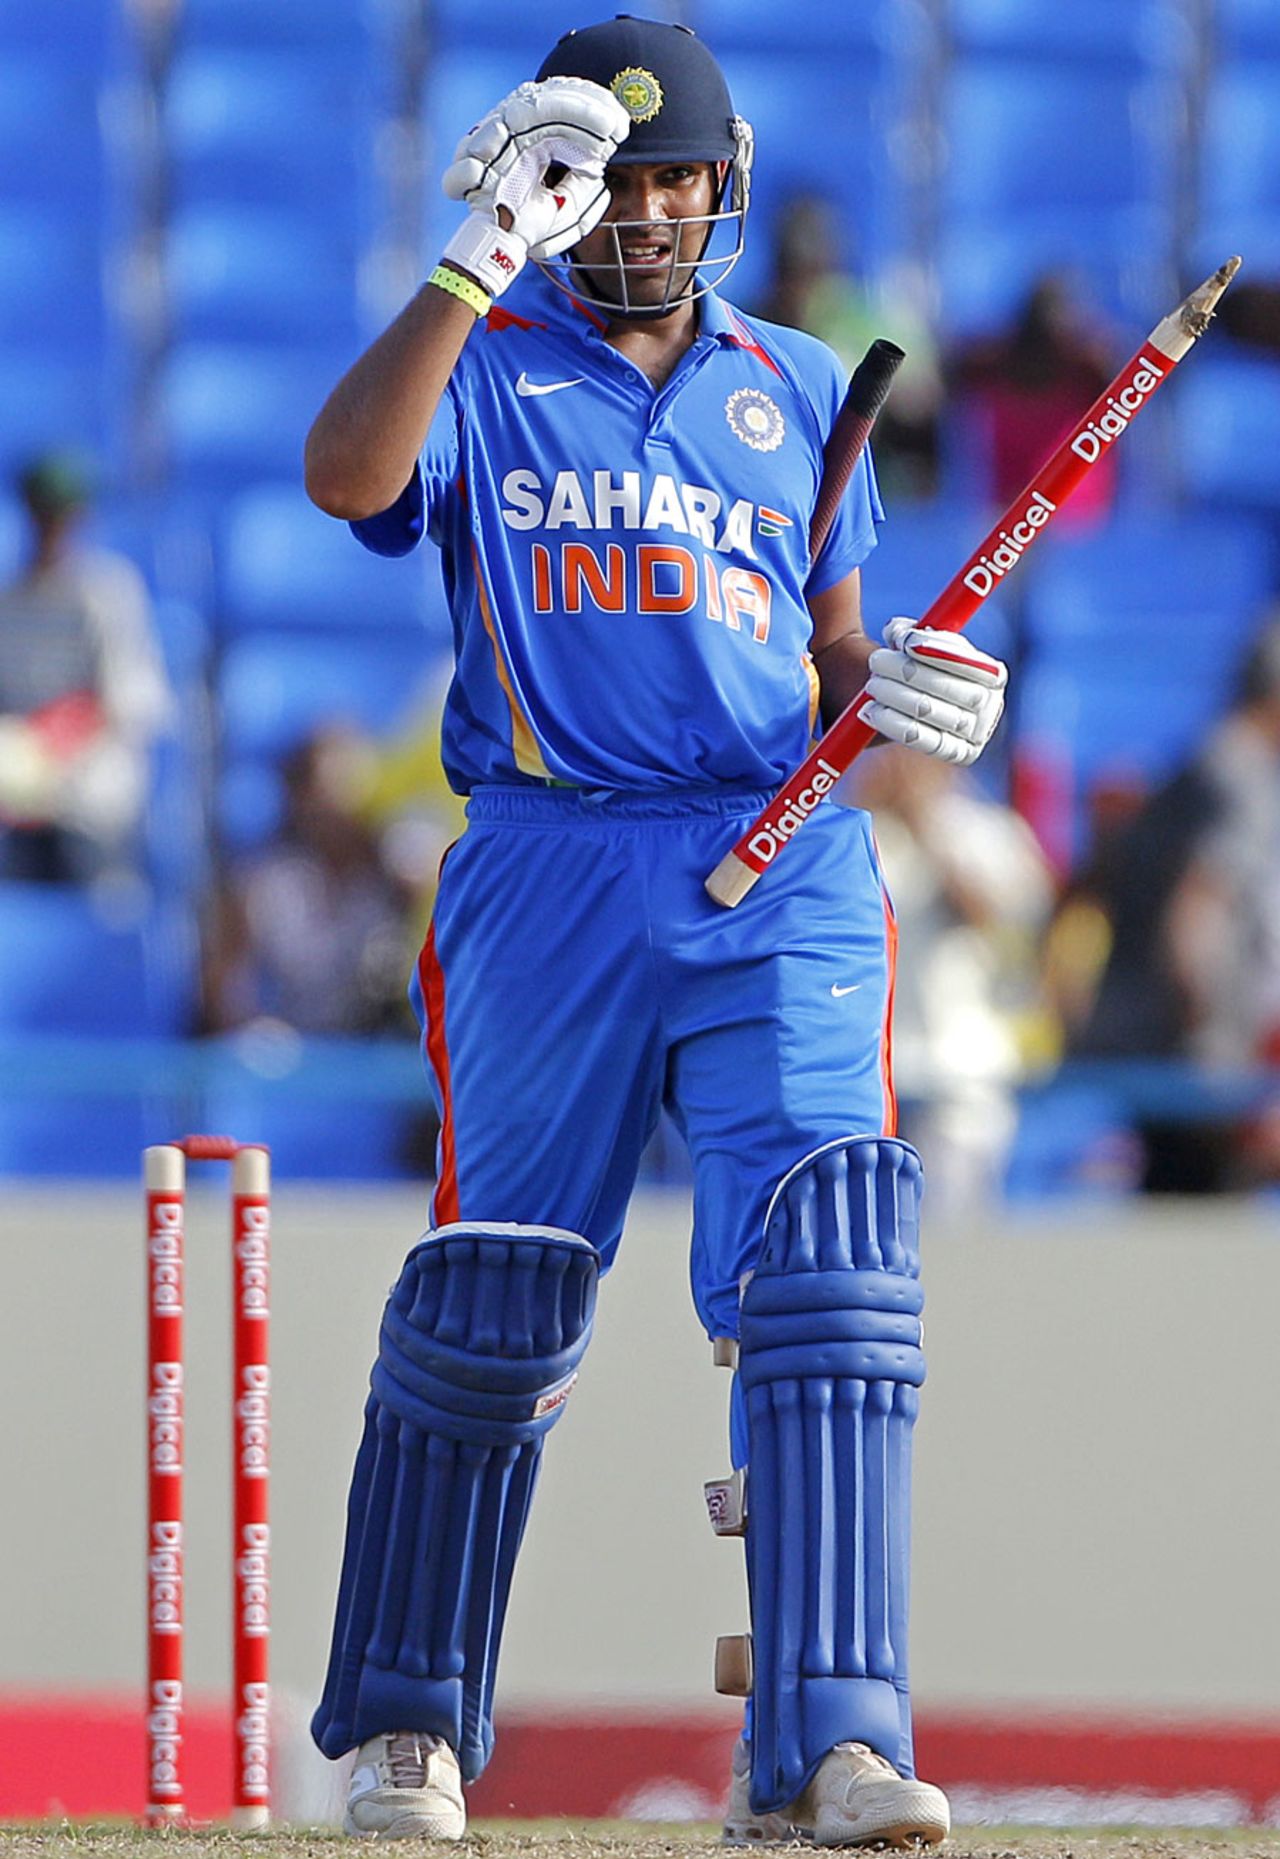 Rohit Sharma's unbeaten 86 helped India seal the series, West Indies v India, 3rd ODI, Antigua, June 11, 2011